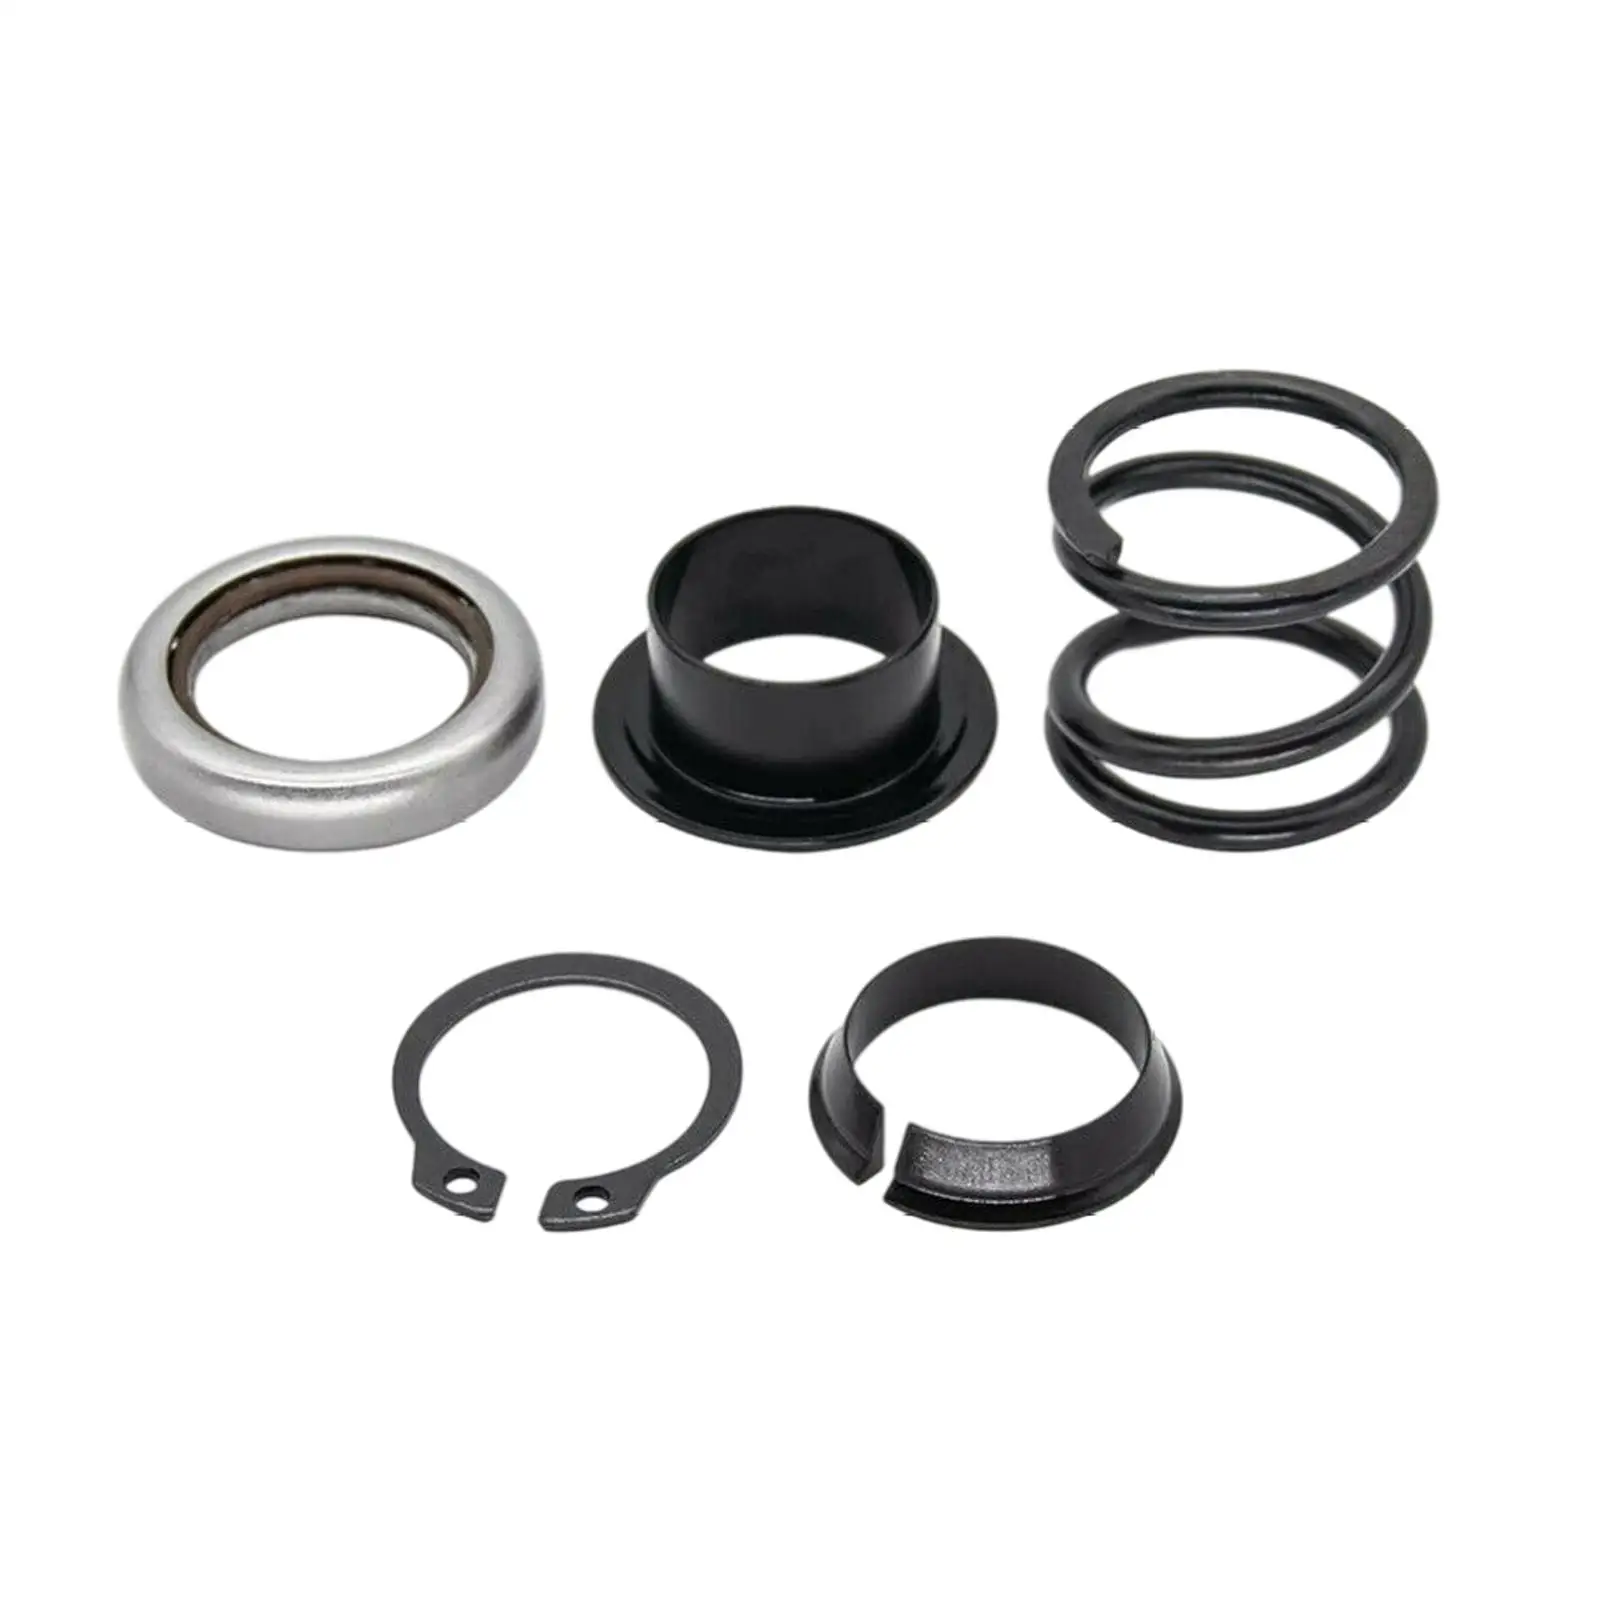 Steering Column Upper Bearing Kit, Moulding Replacement ,Metal ,Accessories Fit for   for  199 F4Dz-3517-A ,Car Supplies